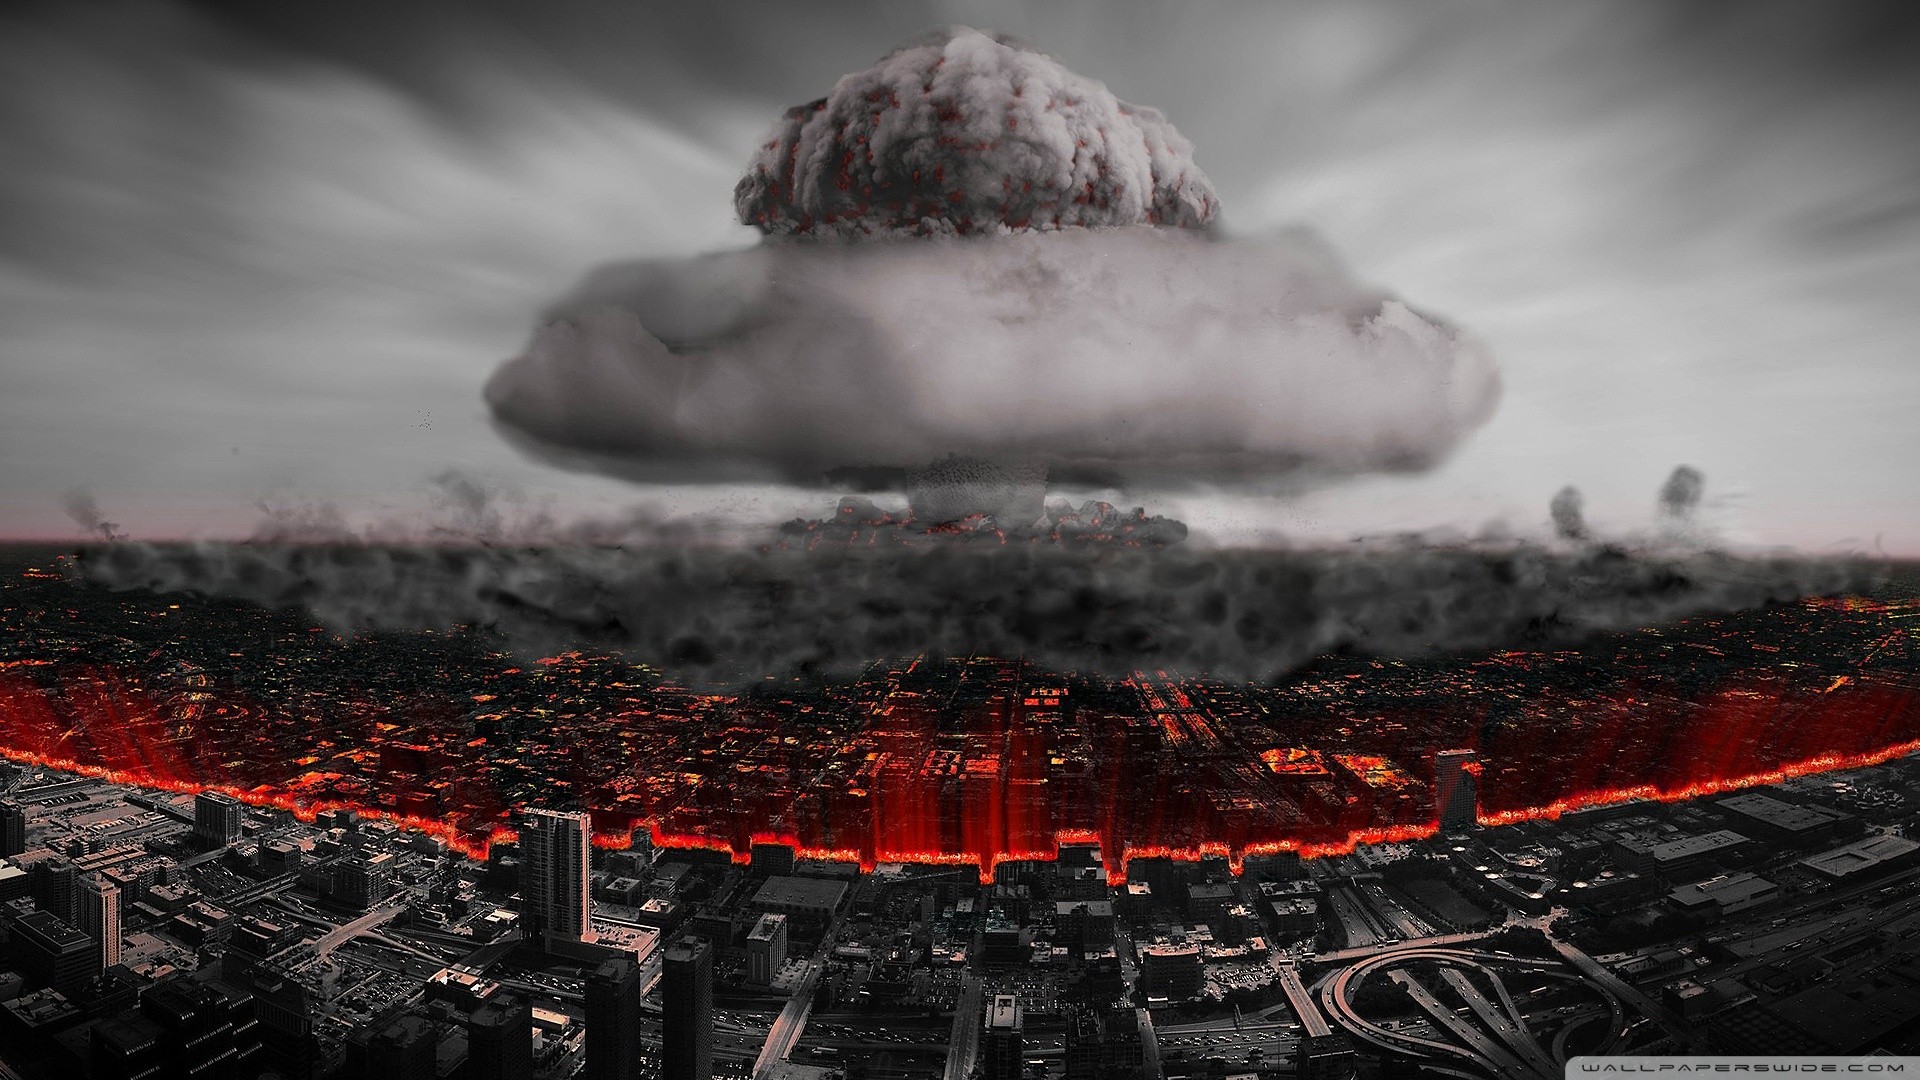 General 1920x1080 bombs city cityscape ruins nuclear explosion selective coloring atomic bomb apocalyptic digital art